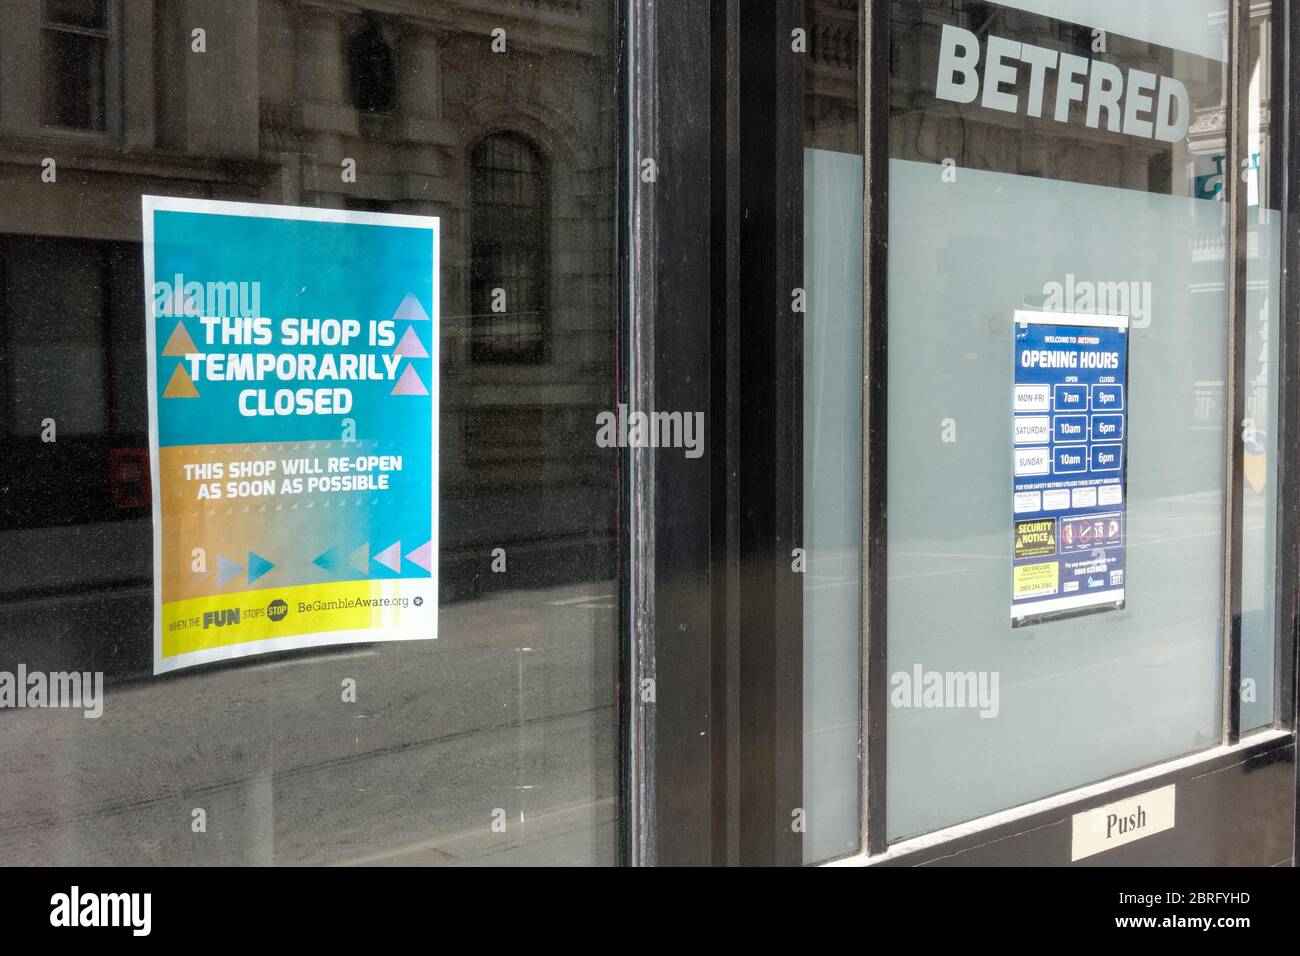 Shop notice for customers on Betfred betting shop, temporarily closed due to coronavirus lockdown, London England UK Stock Photo